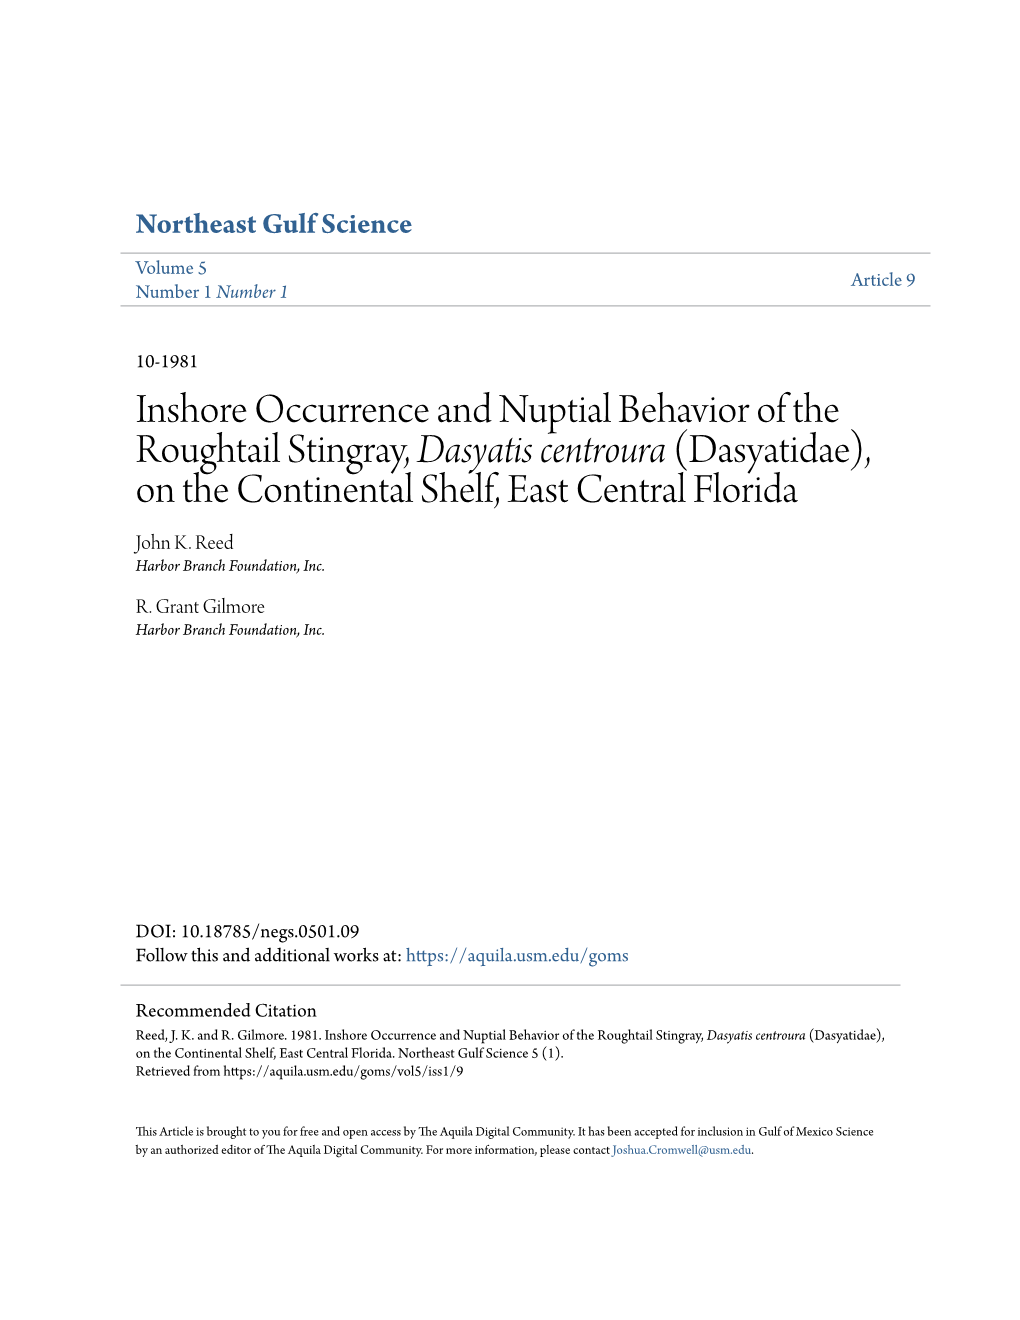 Inshore Occurrence and Nuptial Behavior of the Roughtail Stingray, Dasyatis Centroura (Dasyatidae), on the Continental Shelf, East Central Florida John K